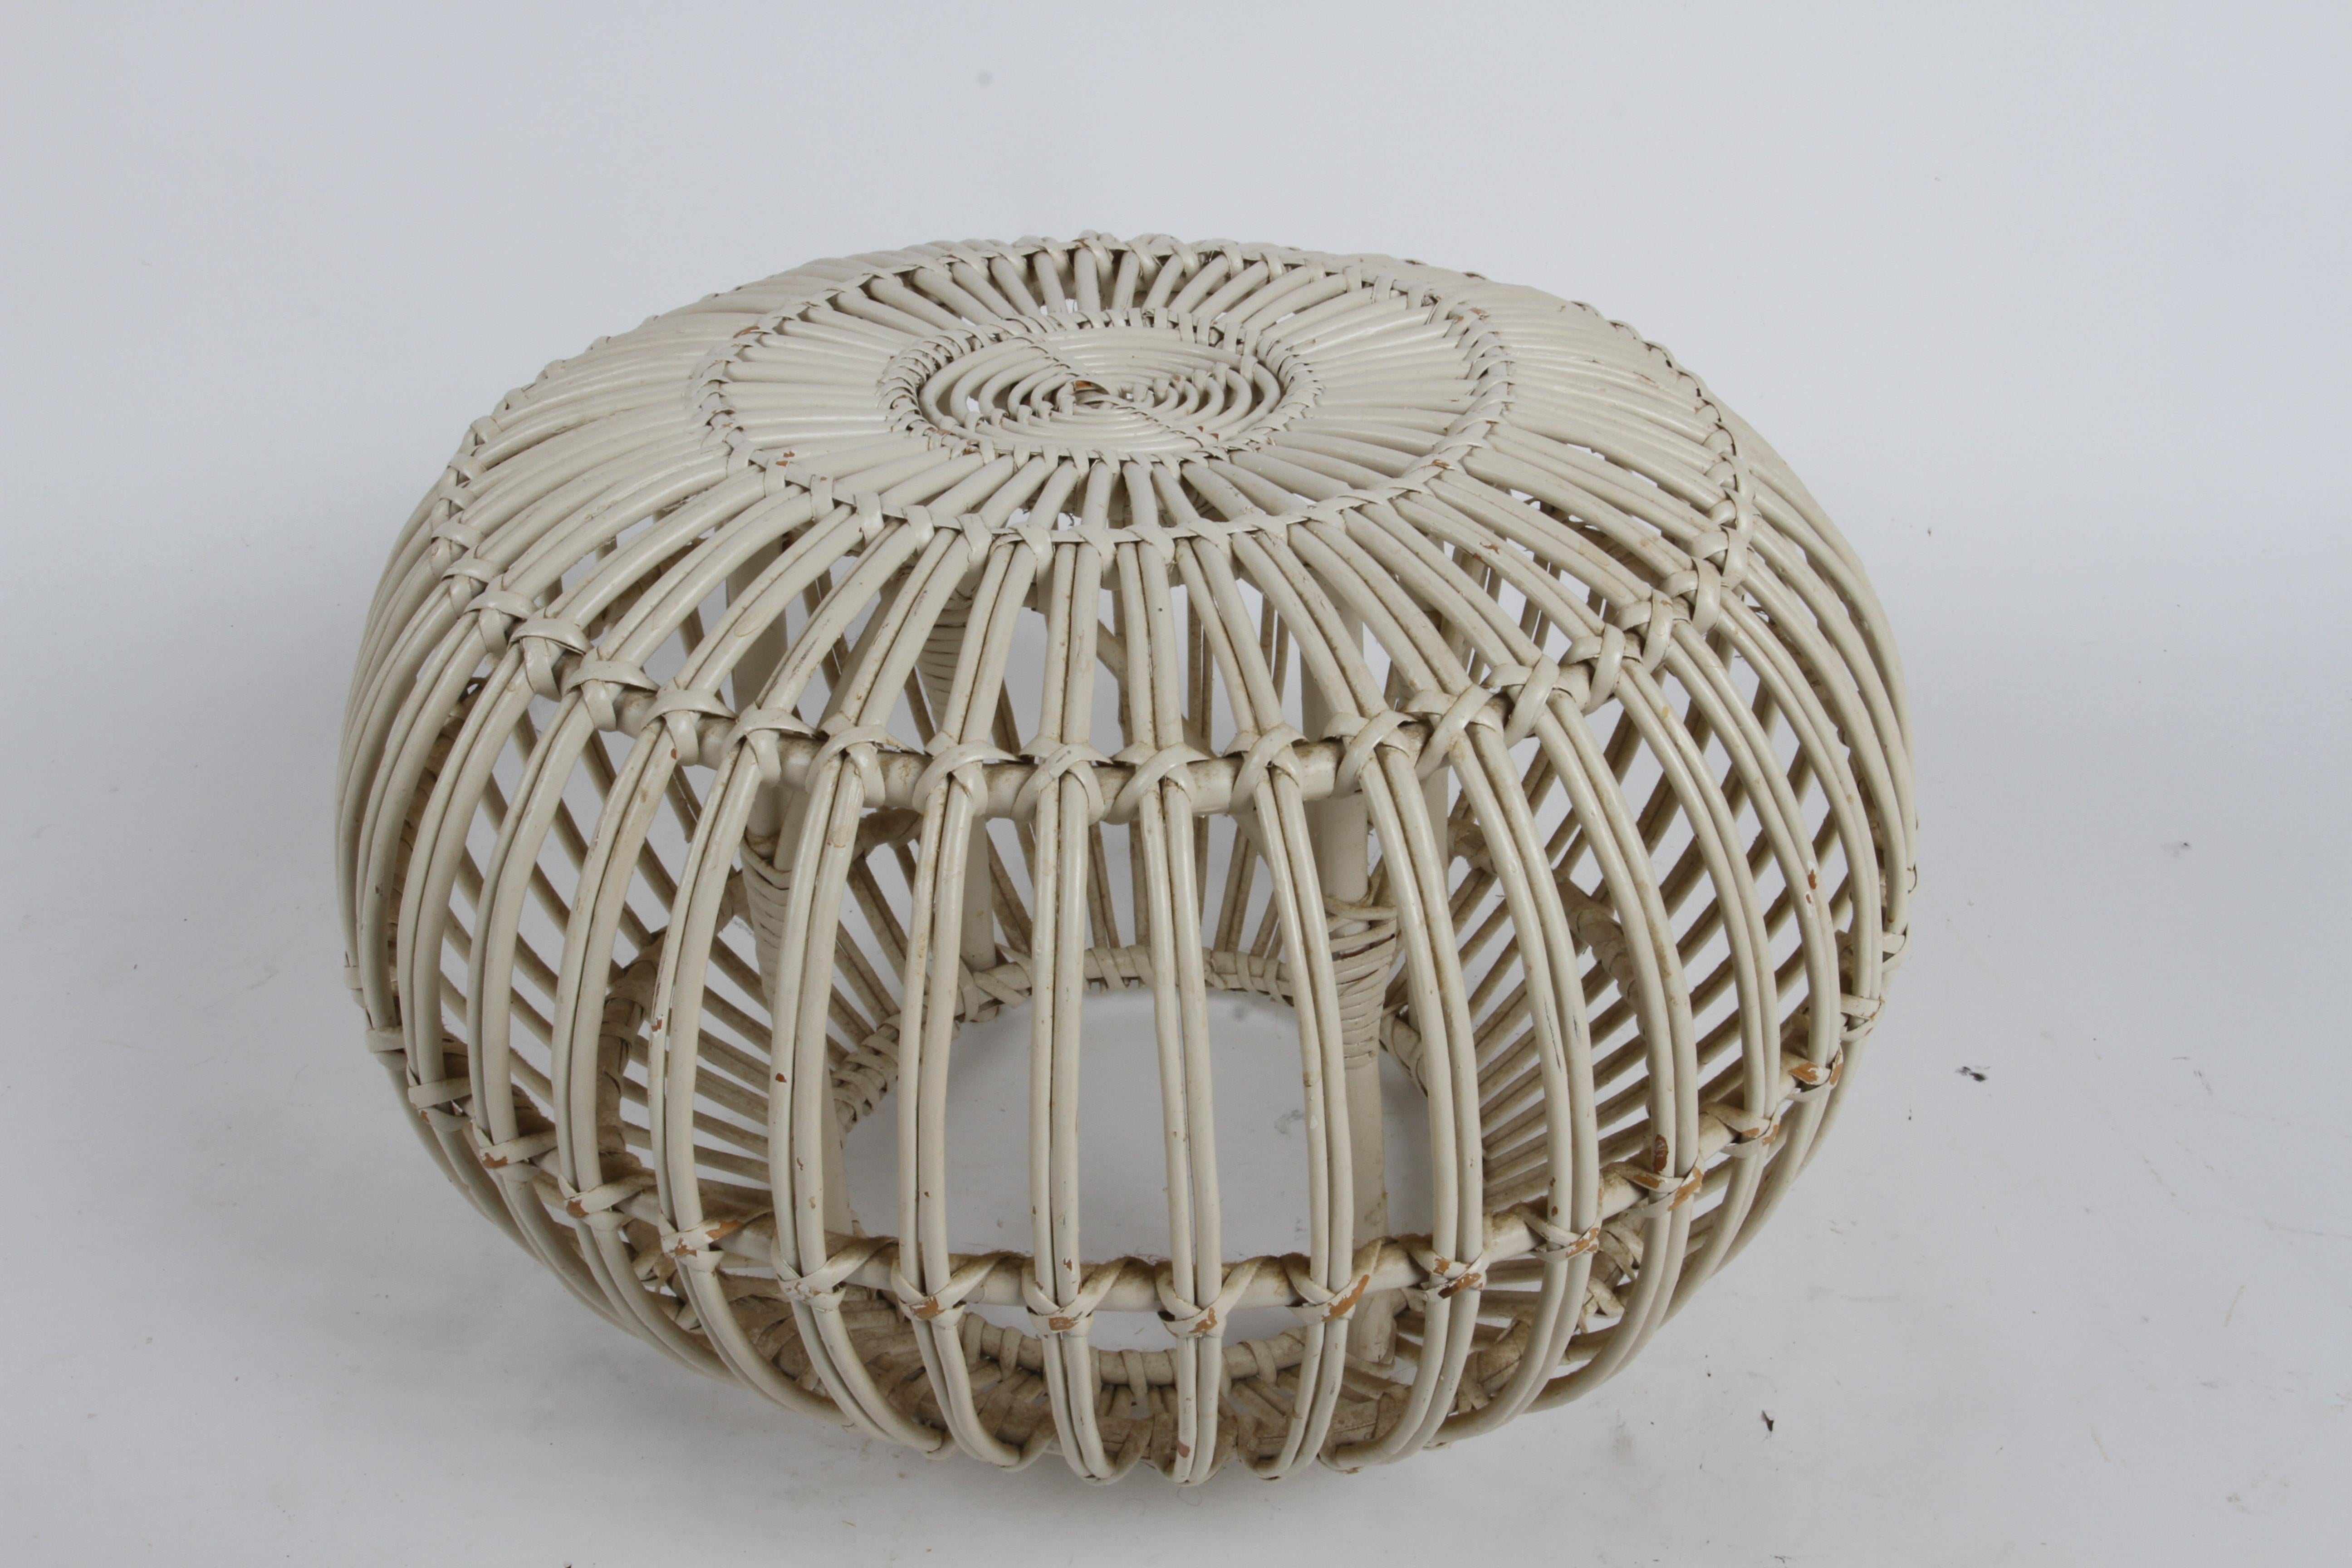 Pair of Mid-Century Modern Franco Albini White Wicker Ottomans, Stools or Poufs For Sale 6